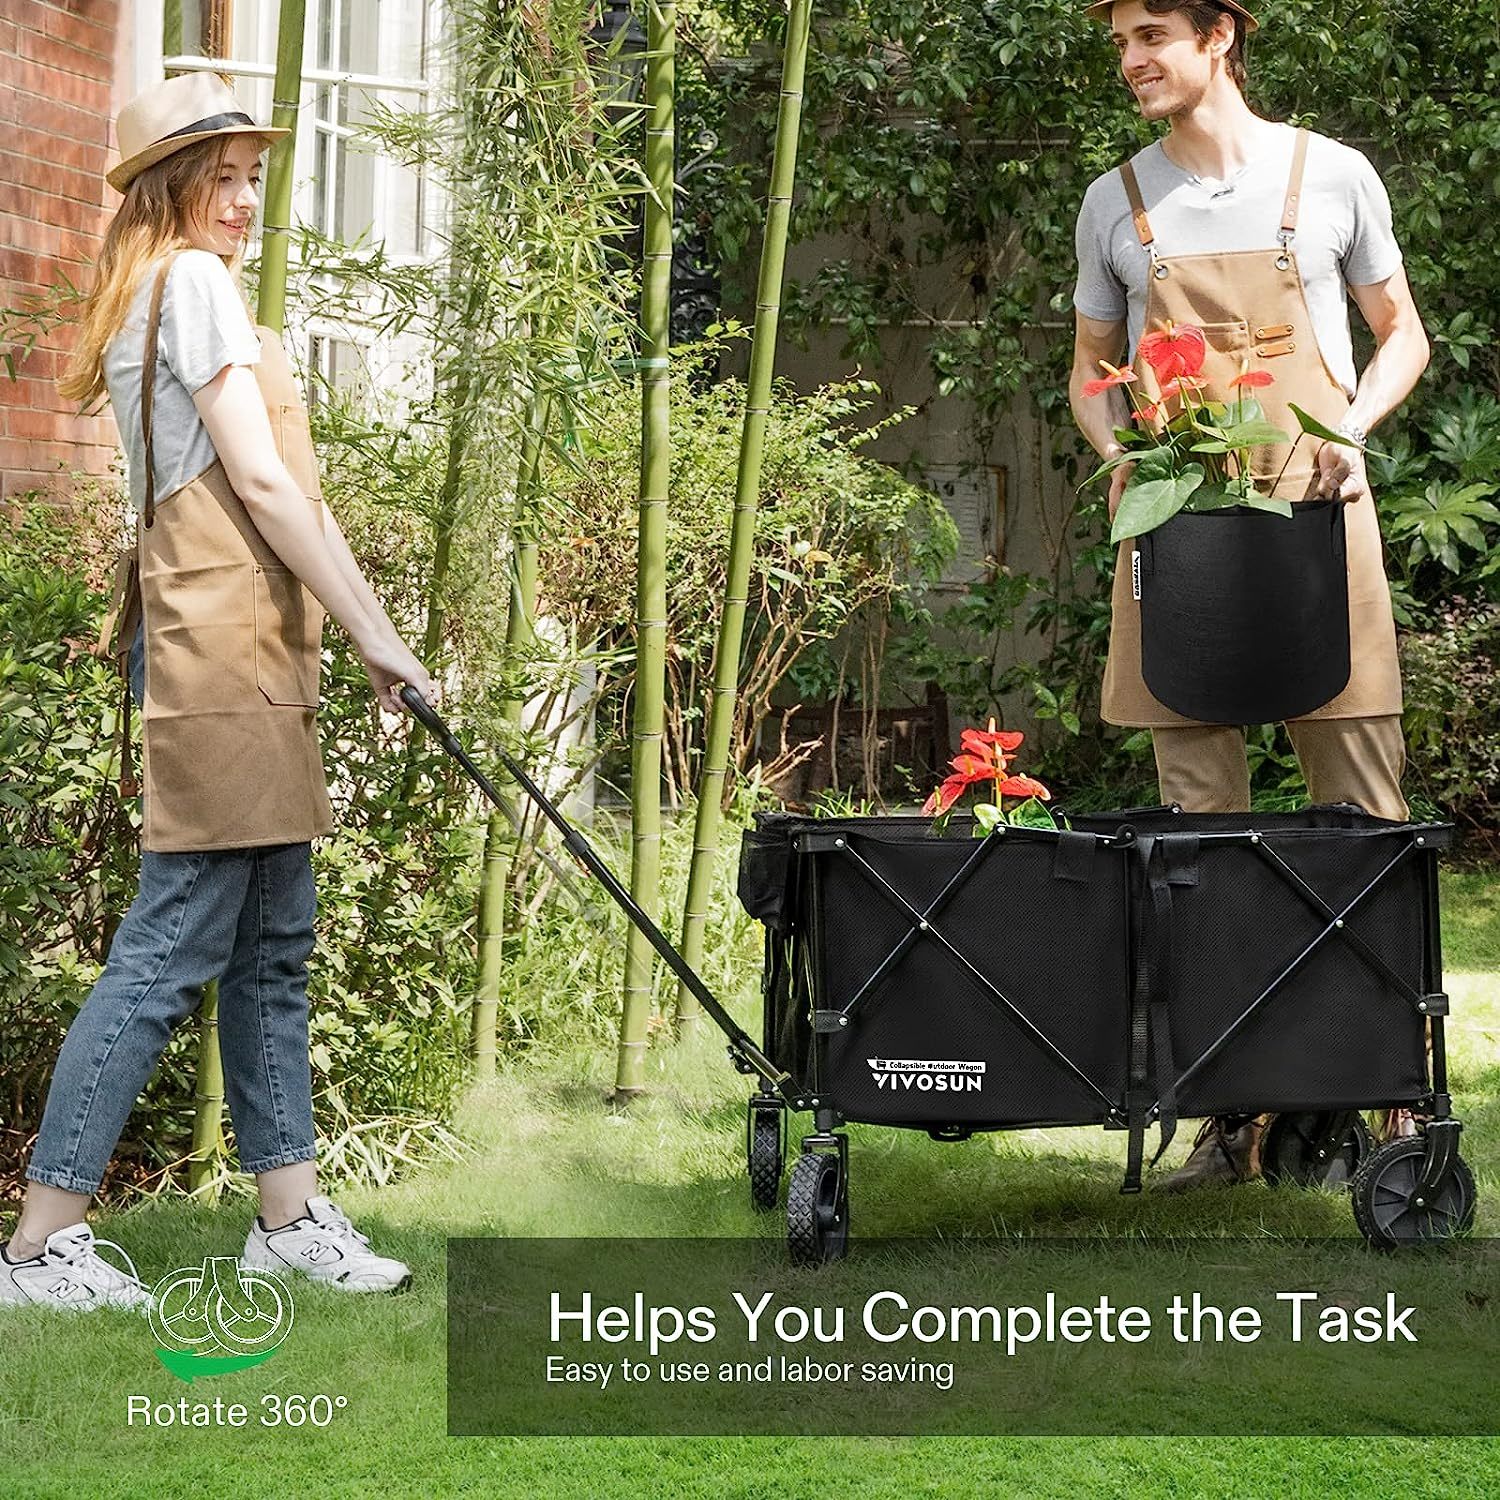 Costway Collapsible Folding Wagon Cart Outdoor Utility Garden